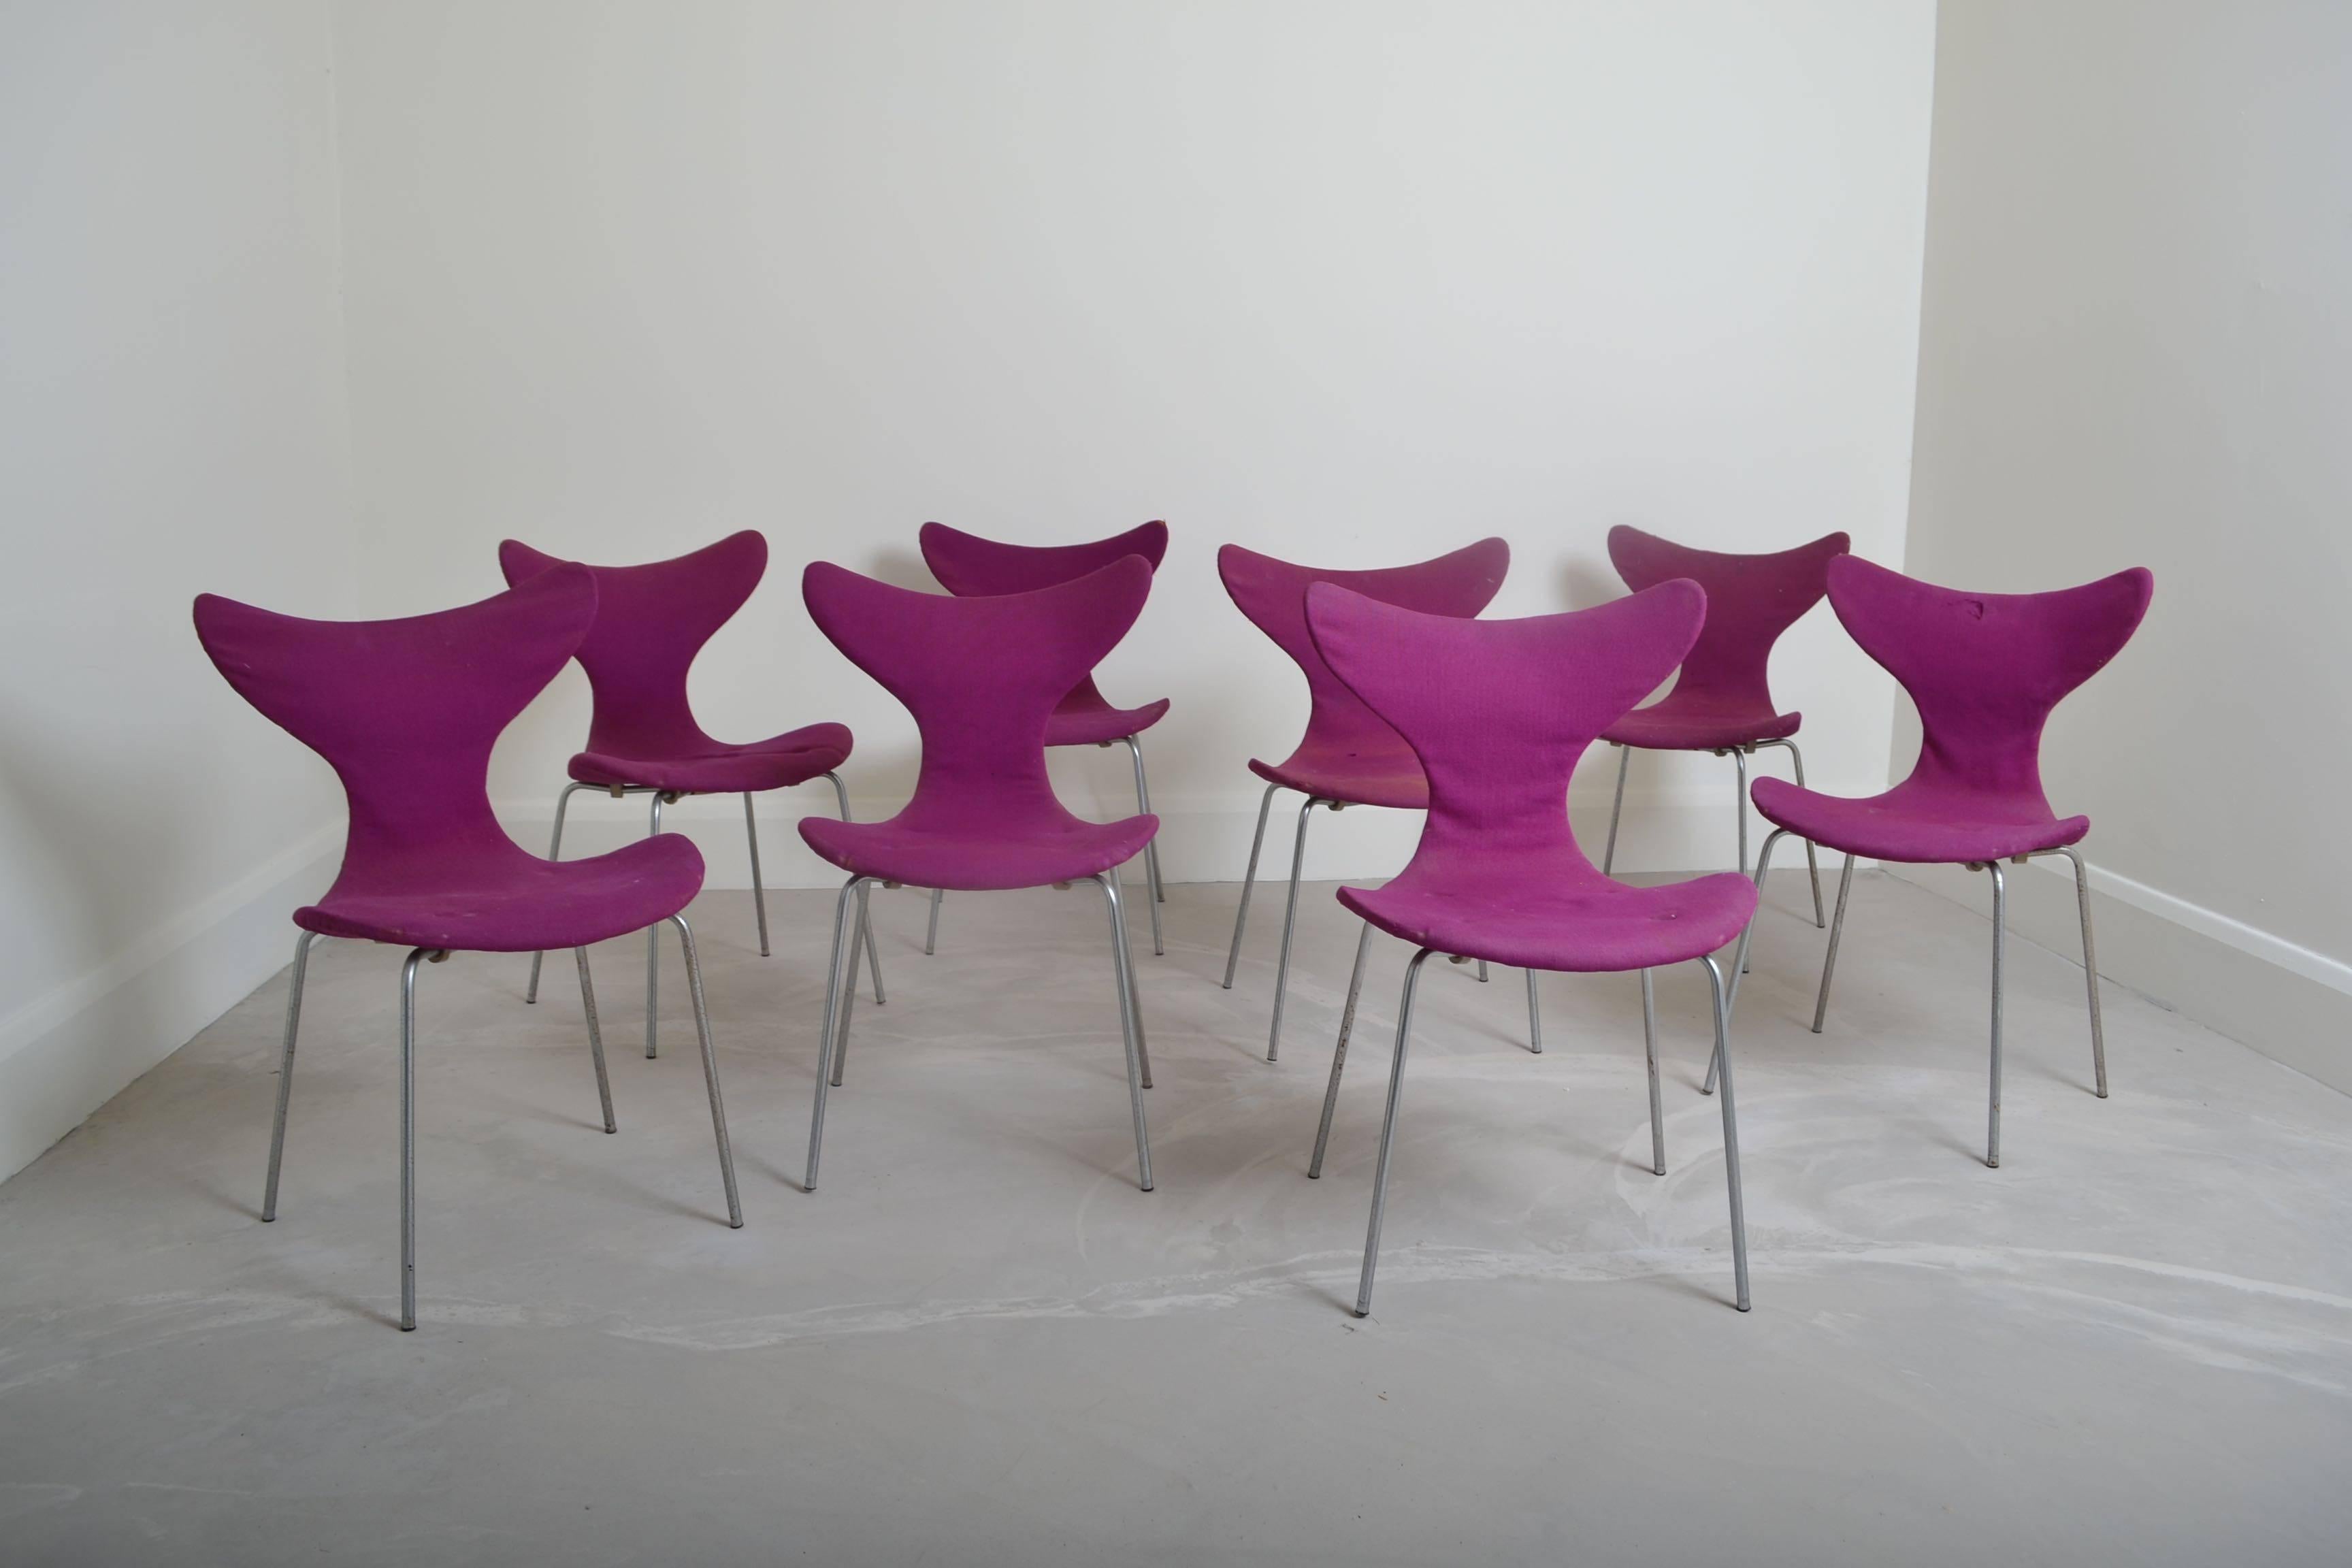 Set of eight 1950s lily chairs designed by Arne Jacobsen 
and manufactured by Fritz Hansen, Denmark.
Offered in original as found condition,
the foam and fabric has perished and will need to be replaced .
The images show pitting to the chrome